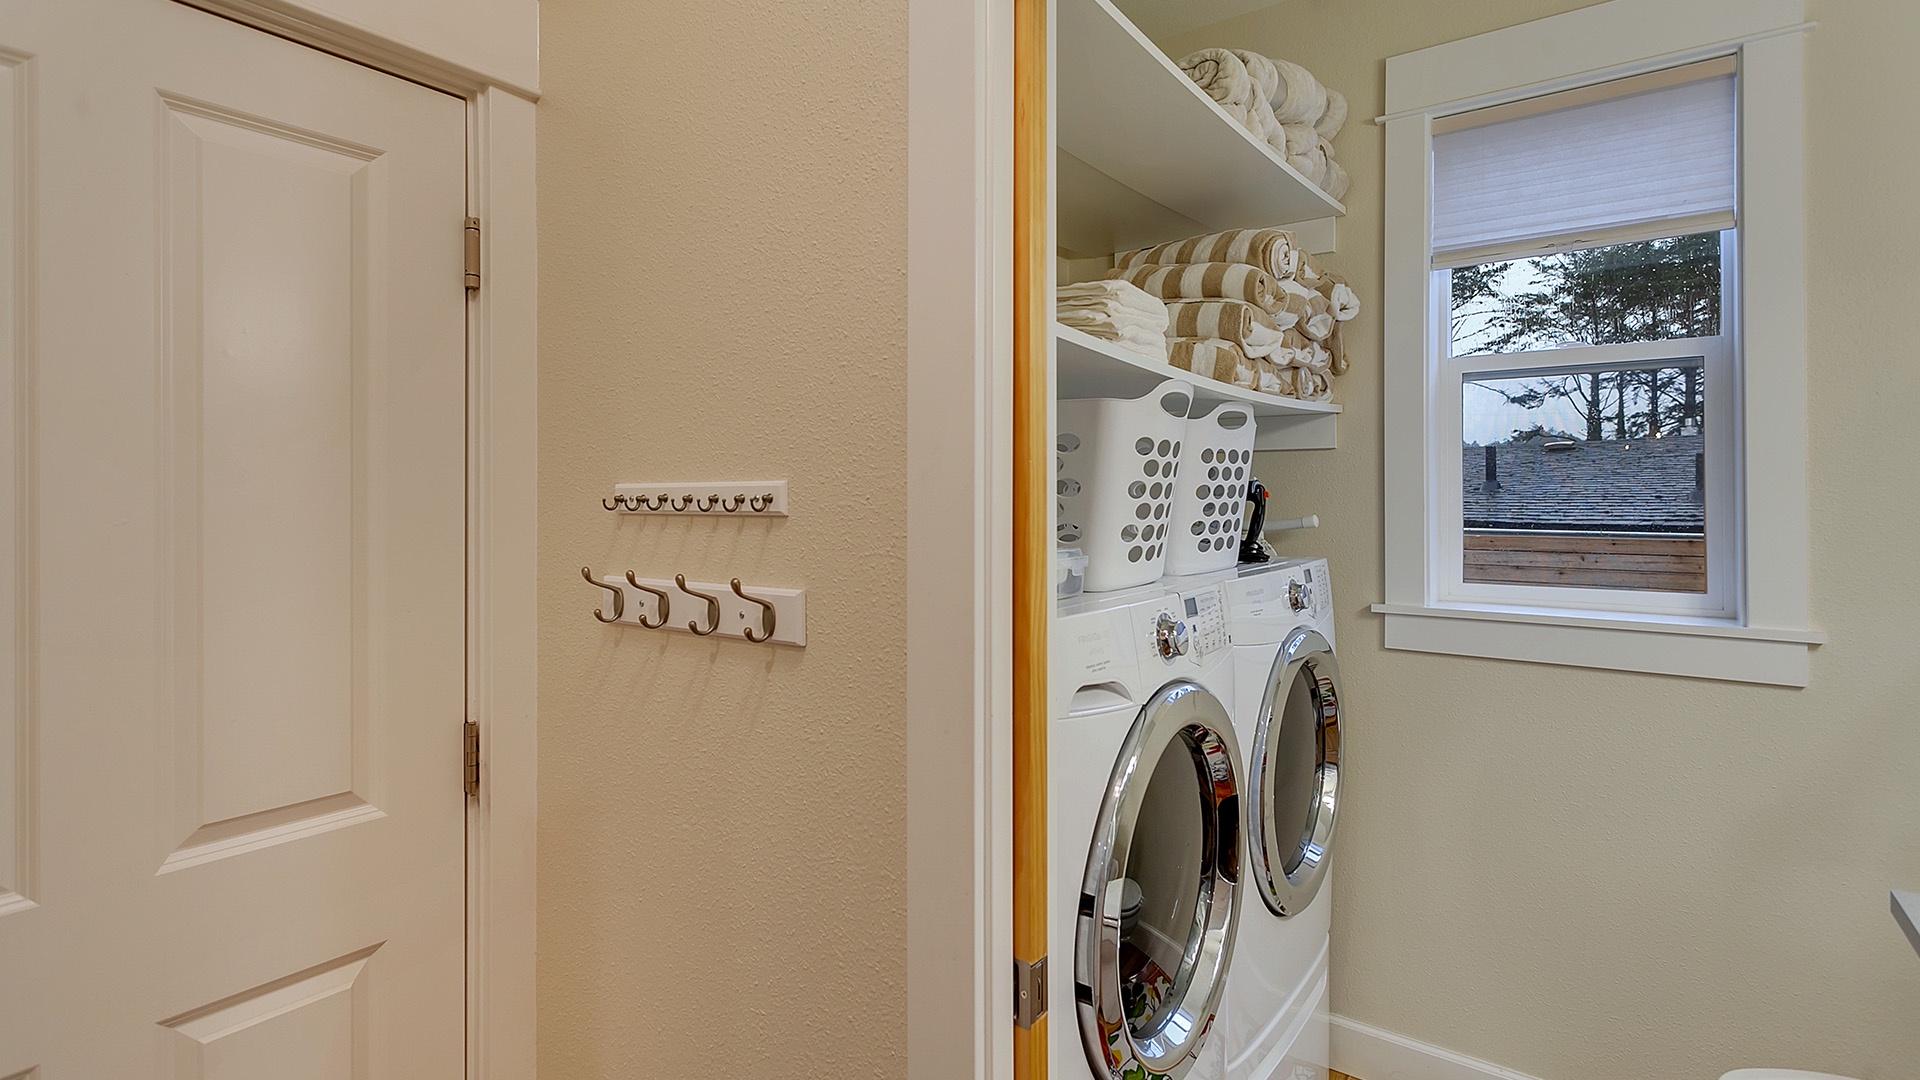 Lincoln City Vacation Rentals, Ohana Beach Park - Equipped with a full-size washer and dryer